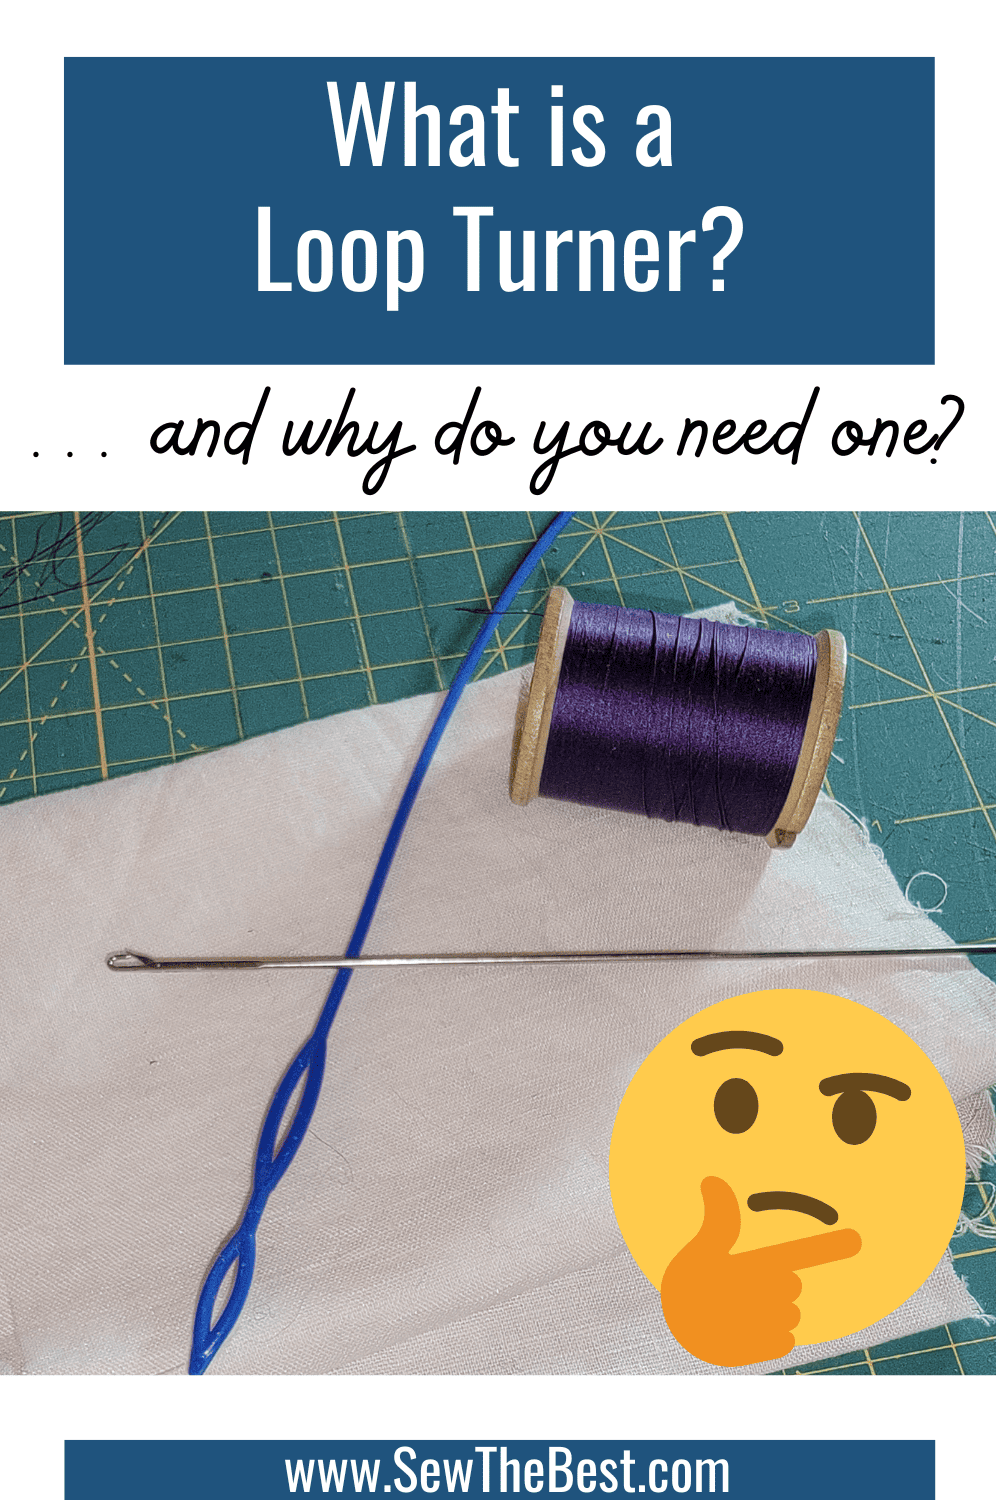 How to use a Loop Turner